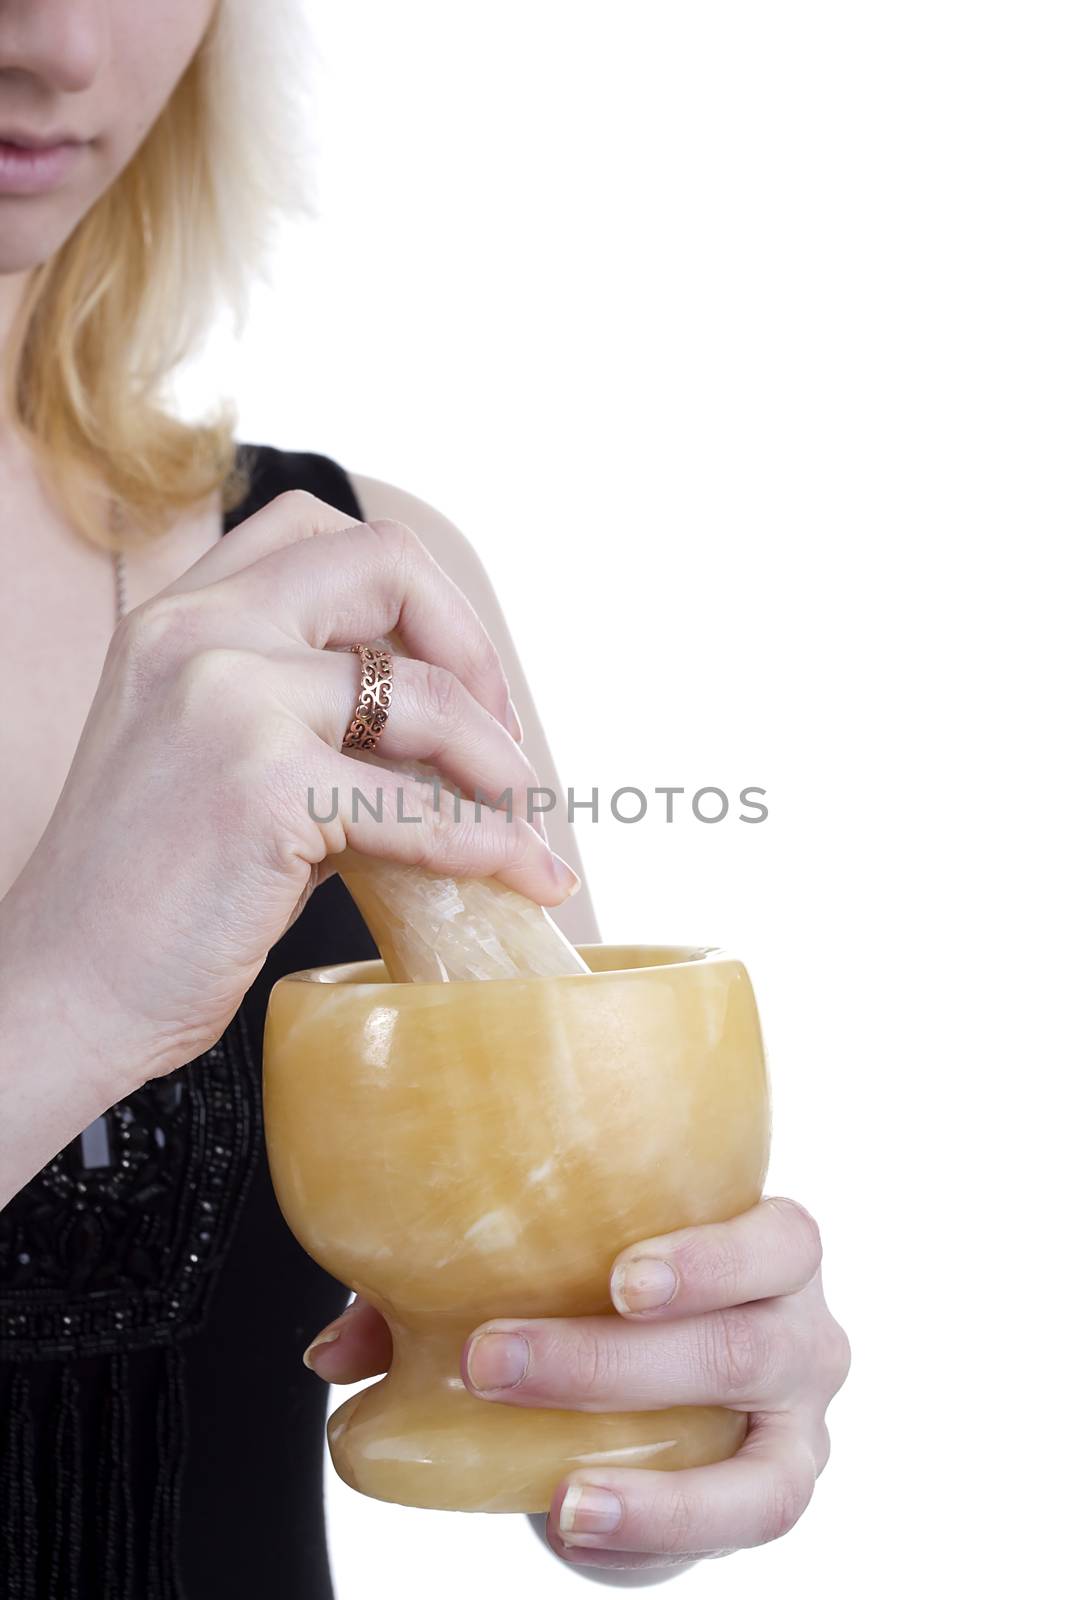 Mortar and pestle in the hands of women on a white background